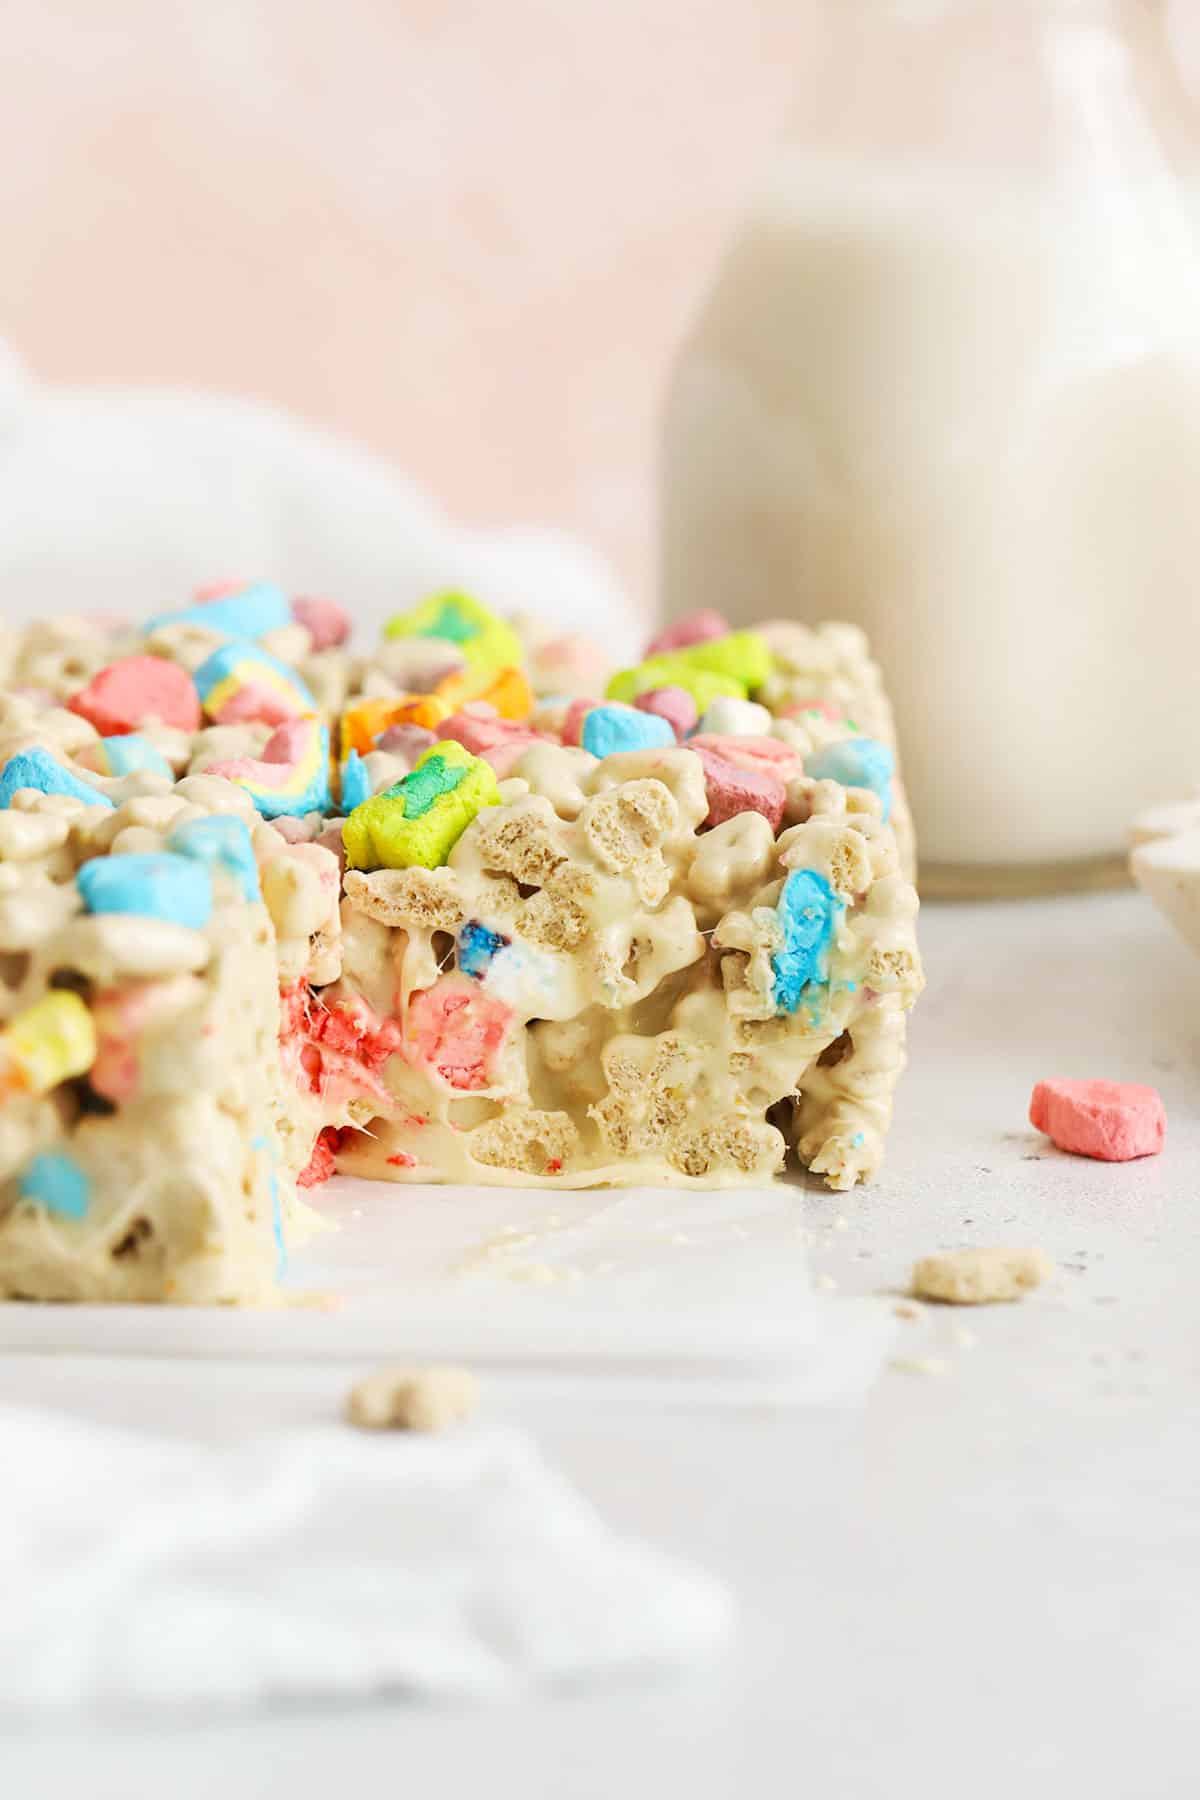 Lucky charms treats cut into squares